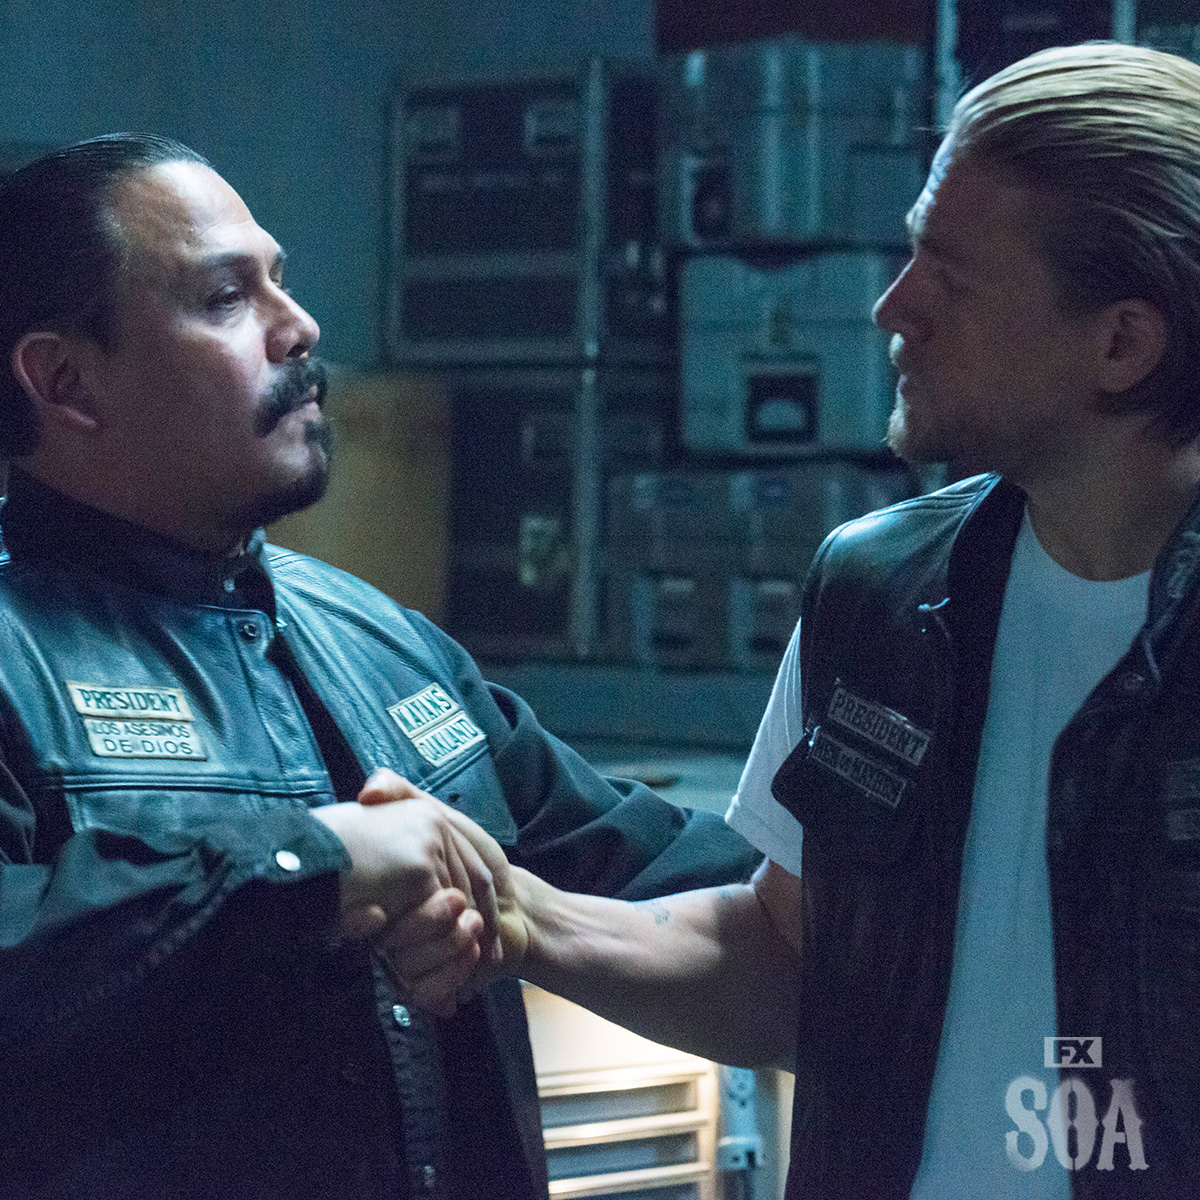 Shake on it. All episodes of FX’s Sons of Anarchy are now available. Stream on Hulu.